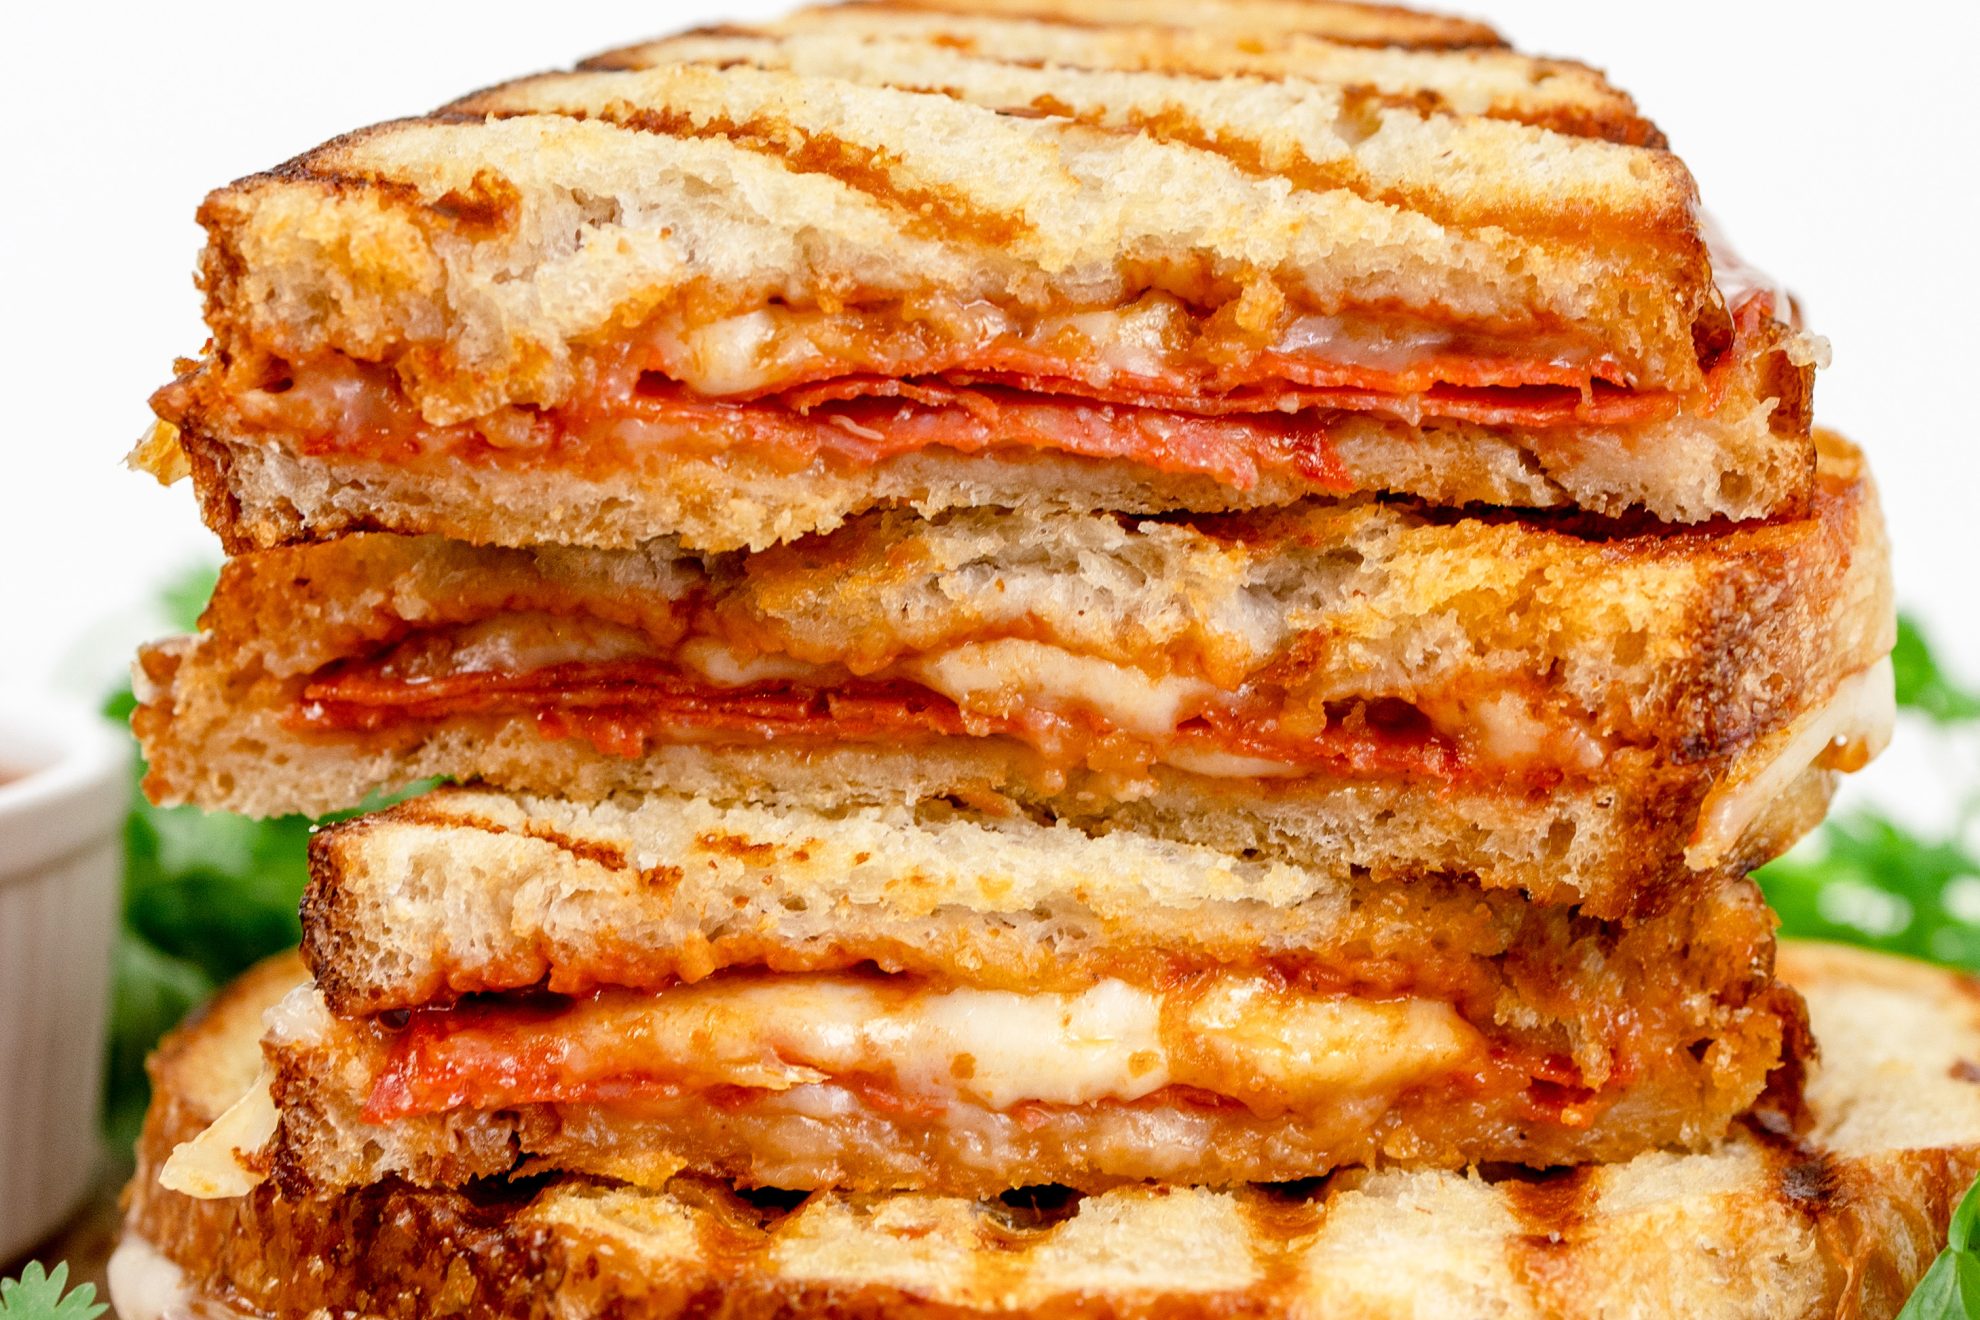 close up of a pizza sandwich cut and piled